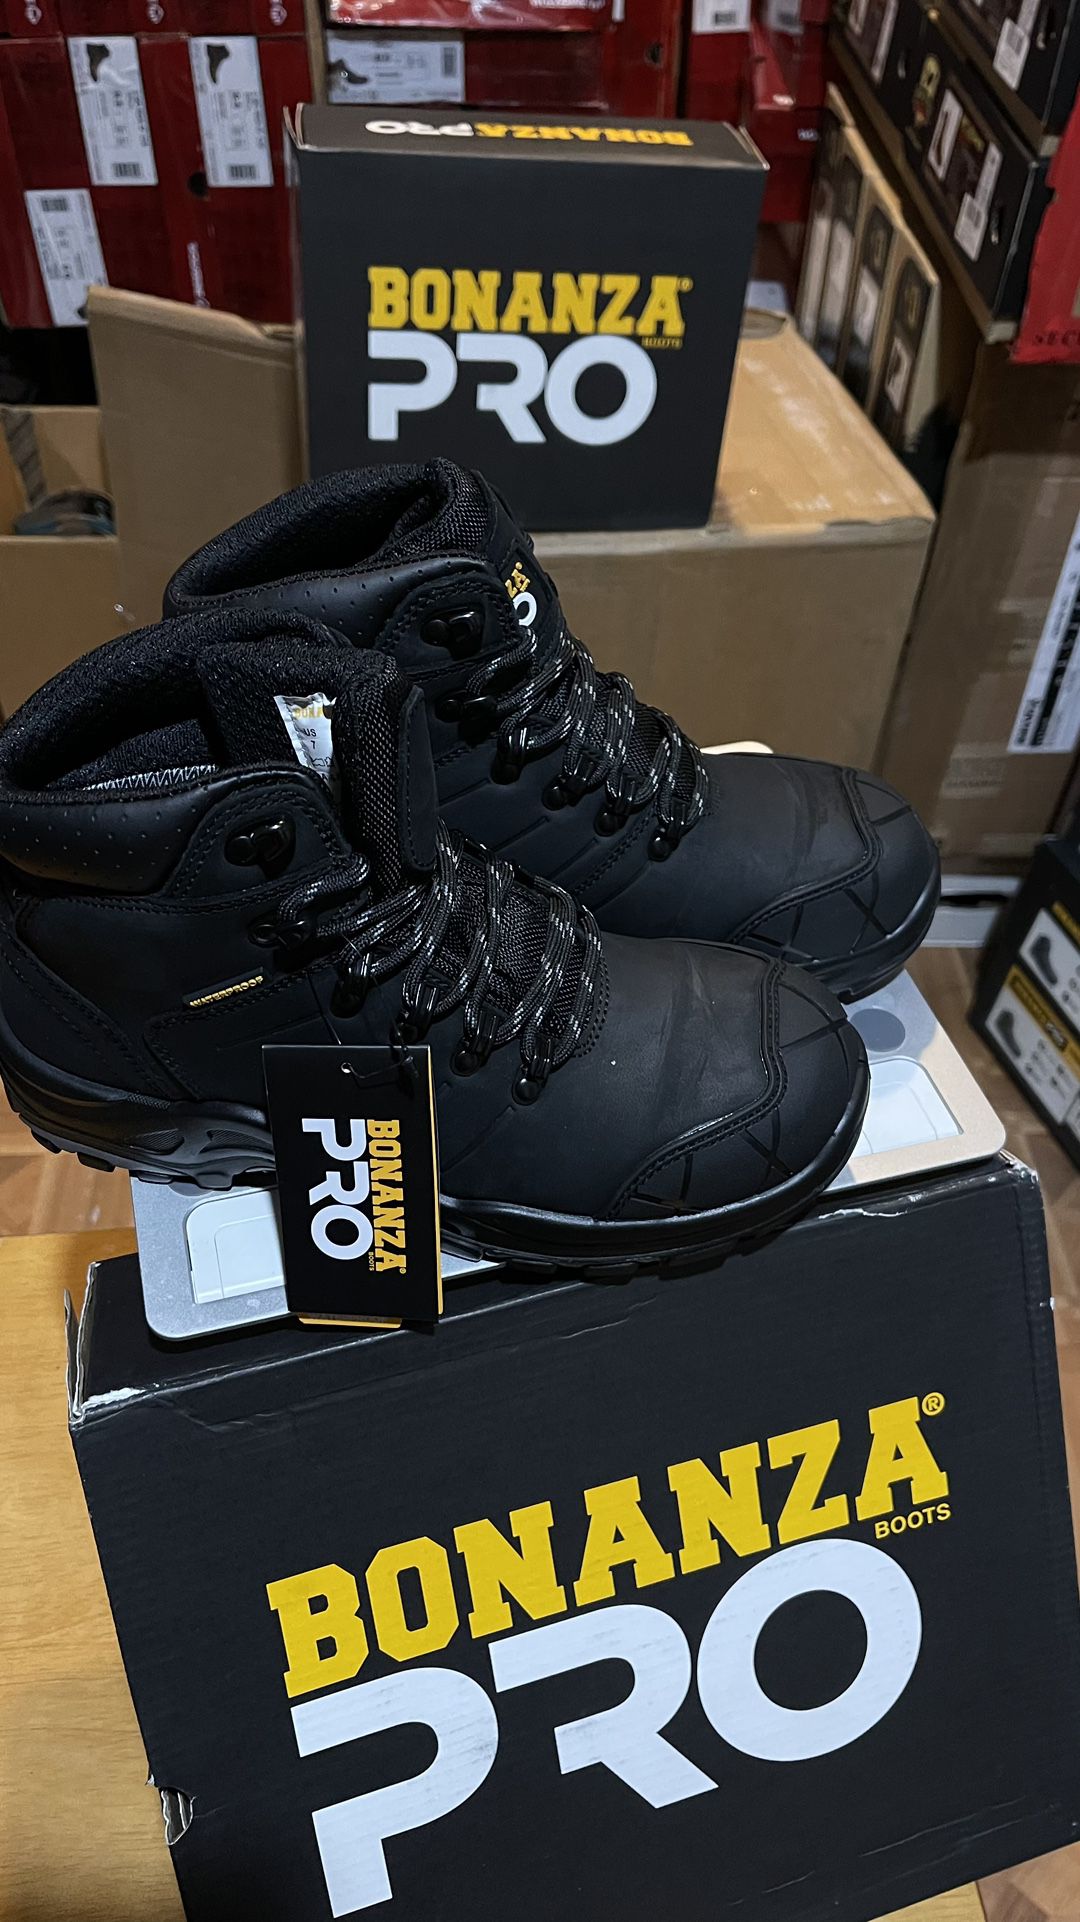 WORk BOOTS 🥾// BONANZA PRO // WATERPROOF 💦different Sizes Available 